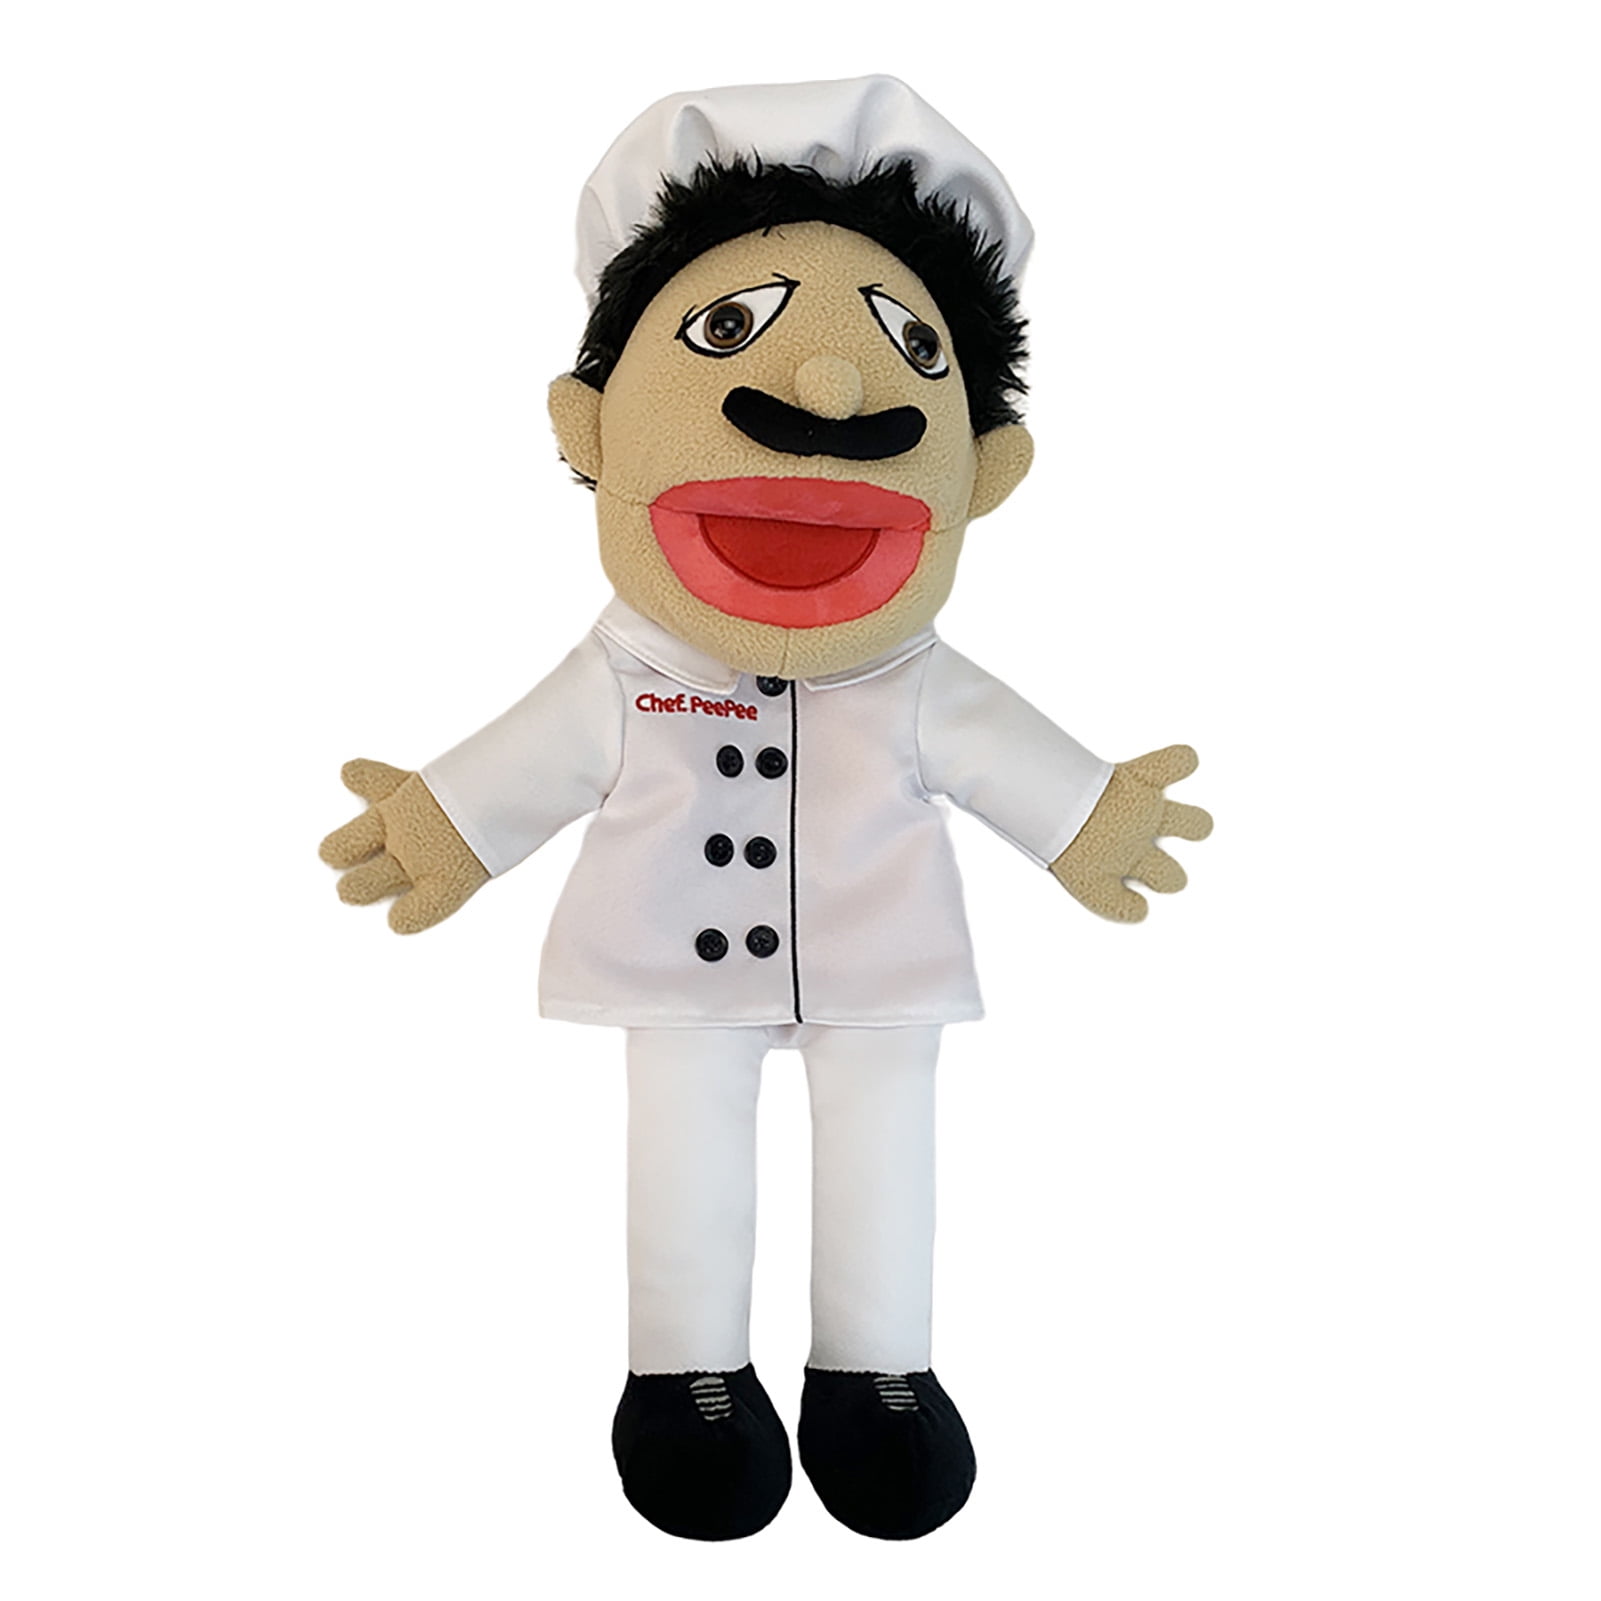 1* Jeffy Puppet Soft Plush Toy Hand Puppet for Play House